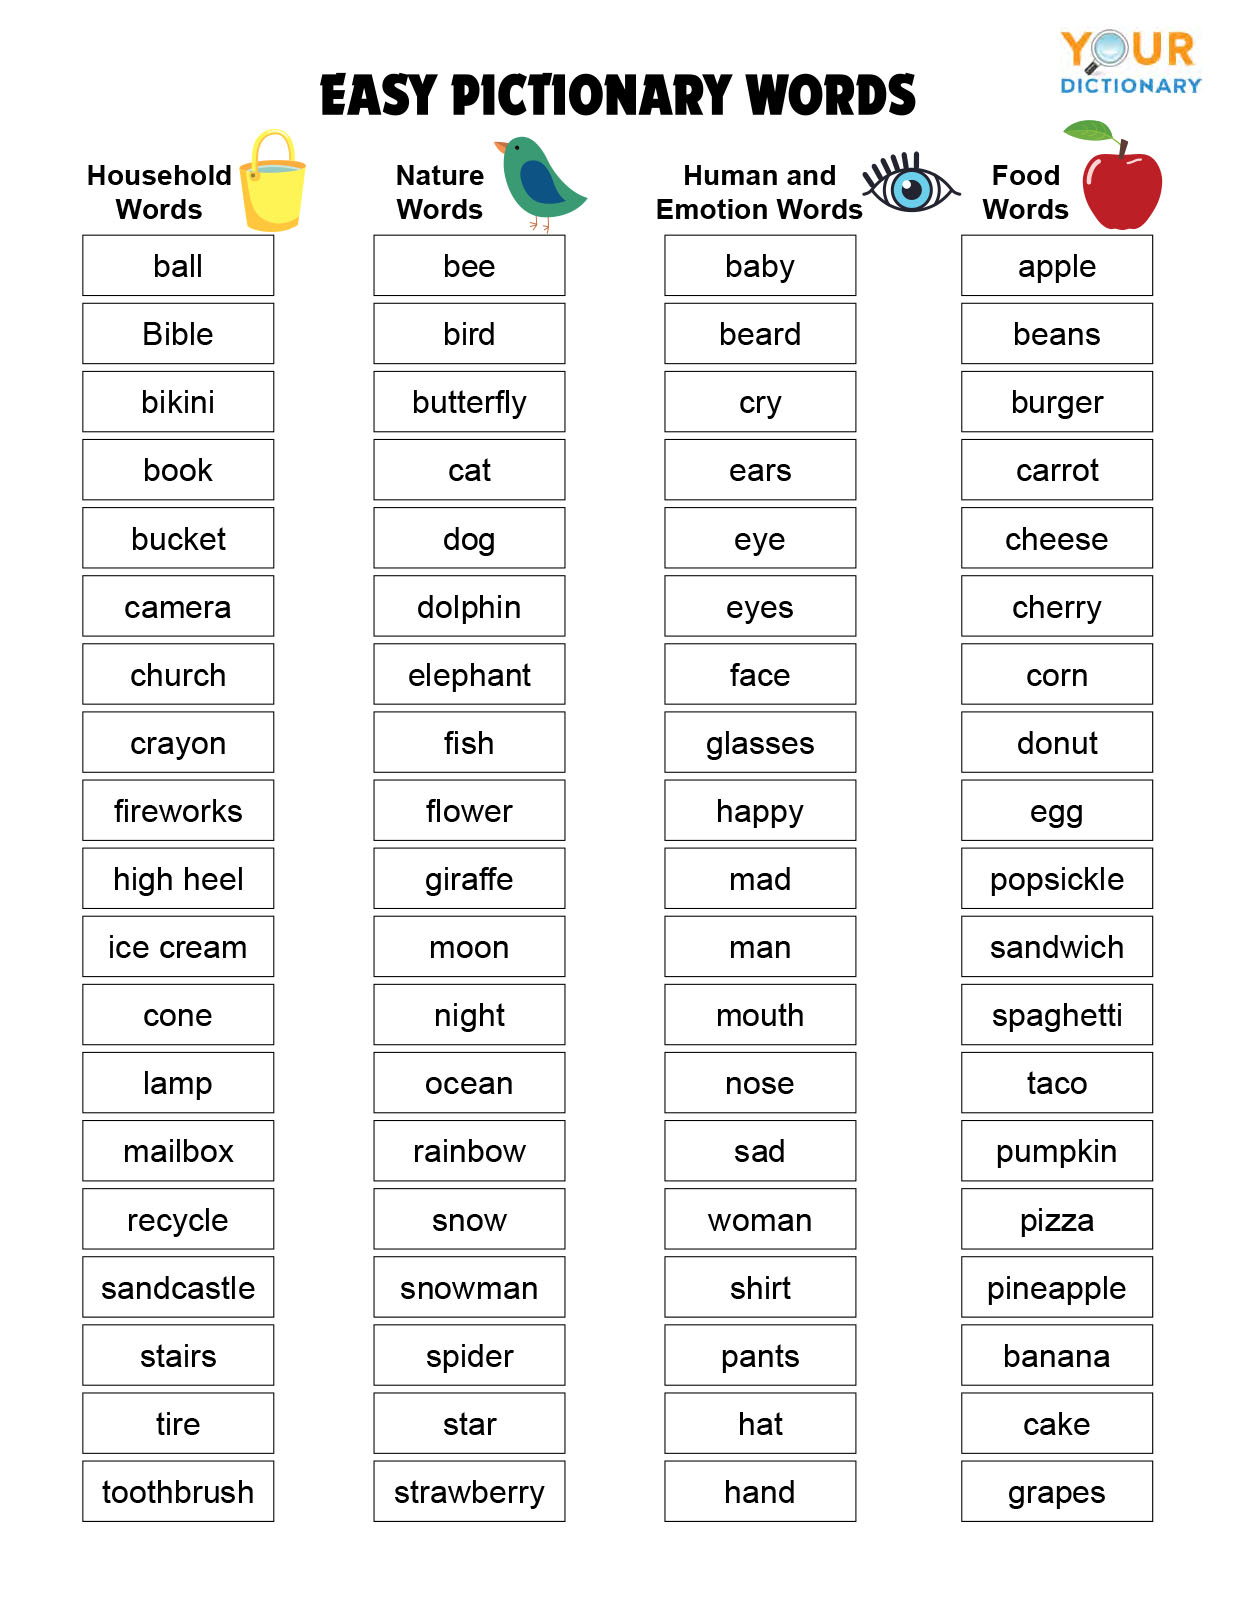 Easy Pictionary Word List